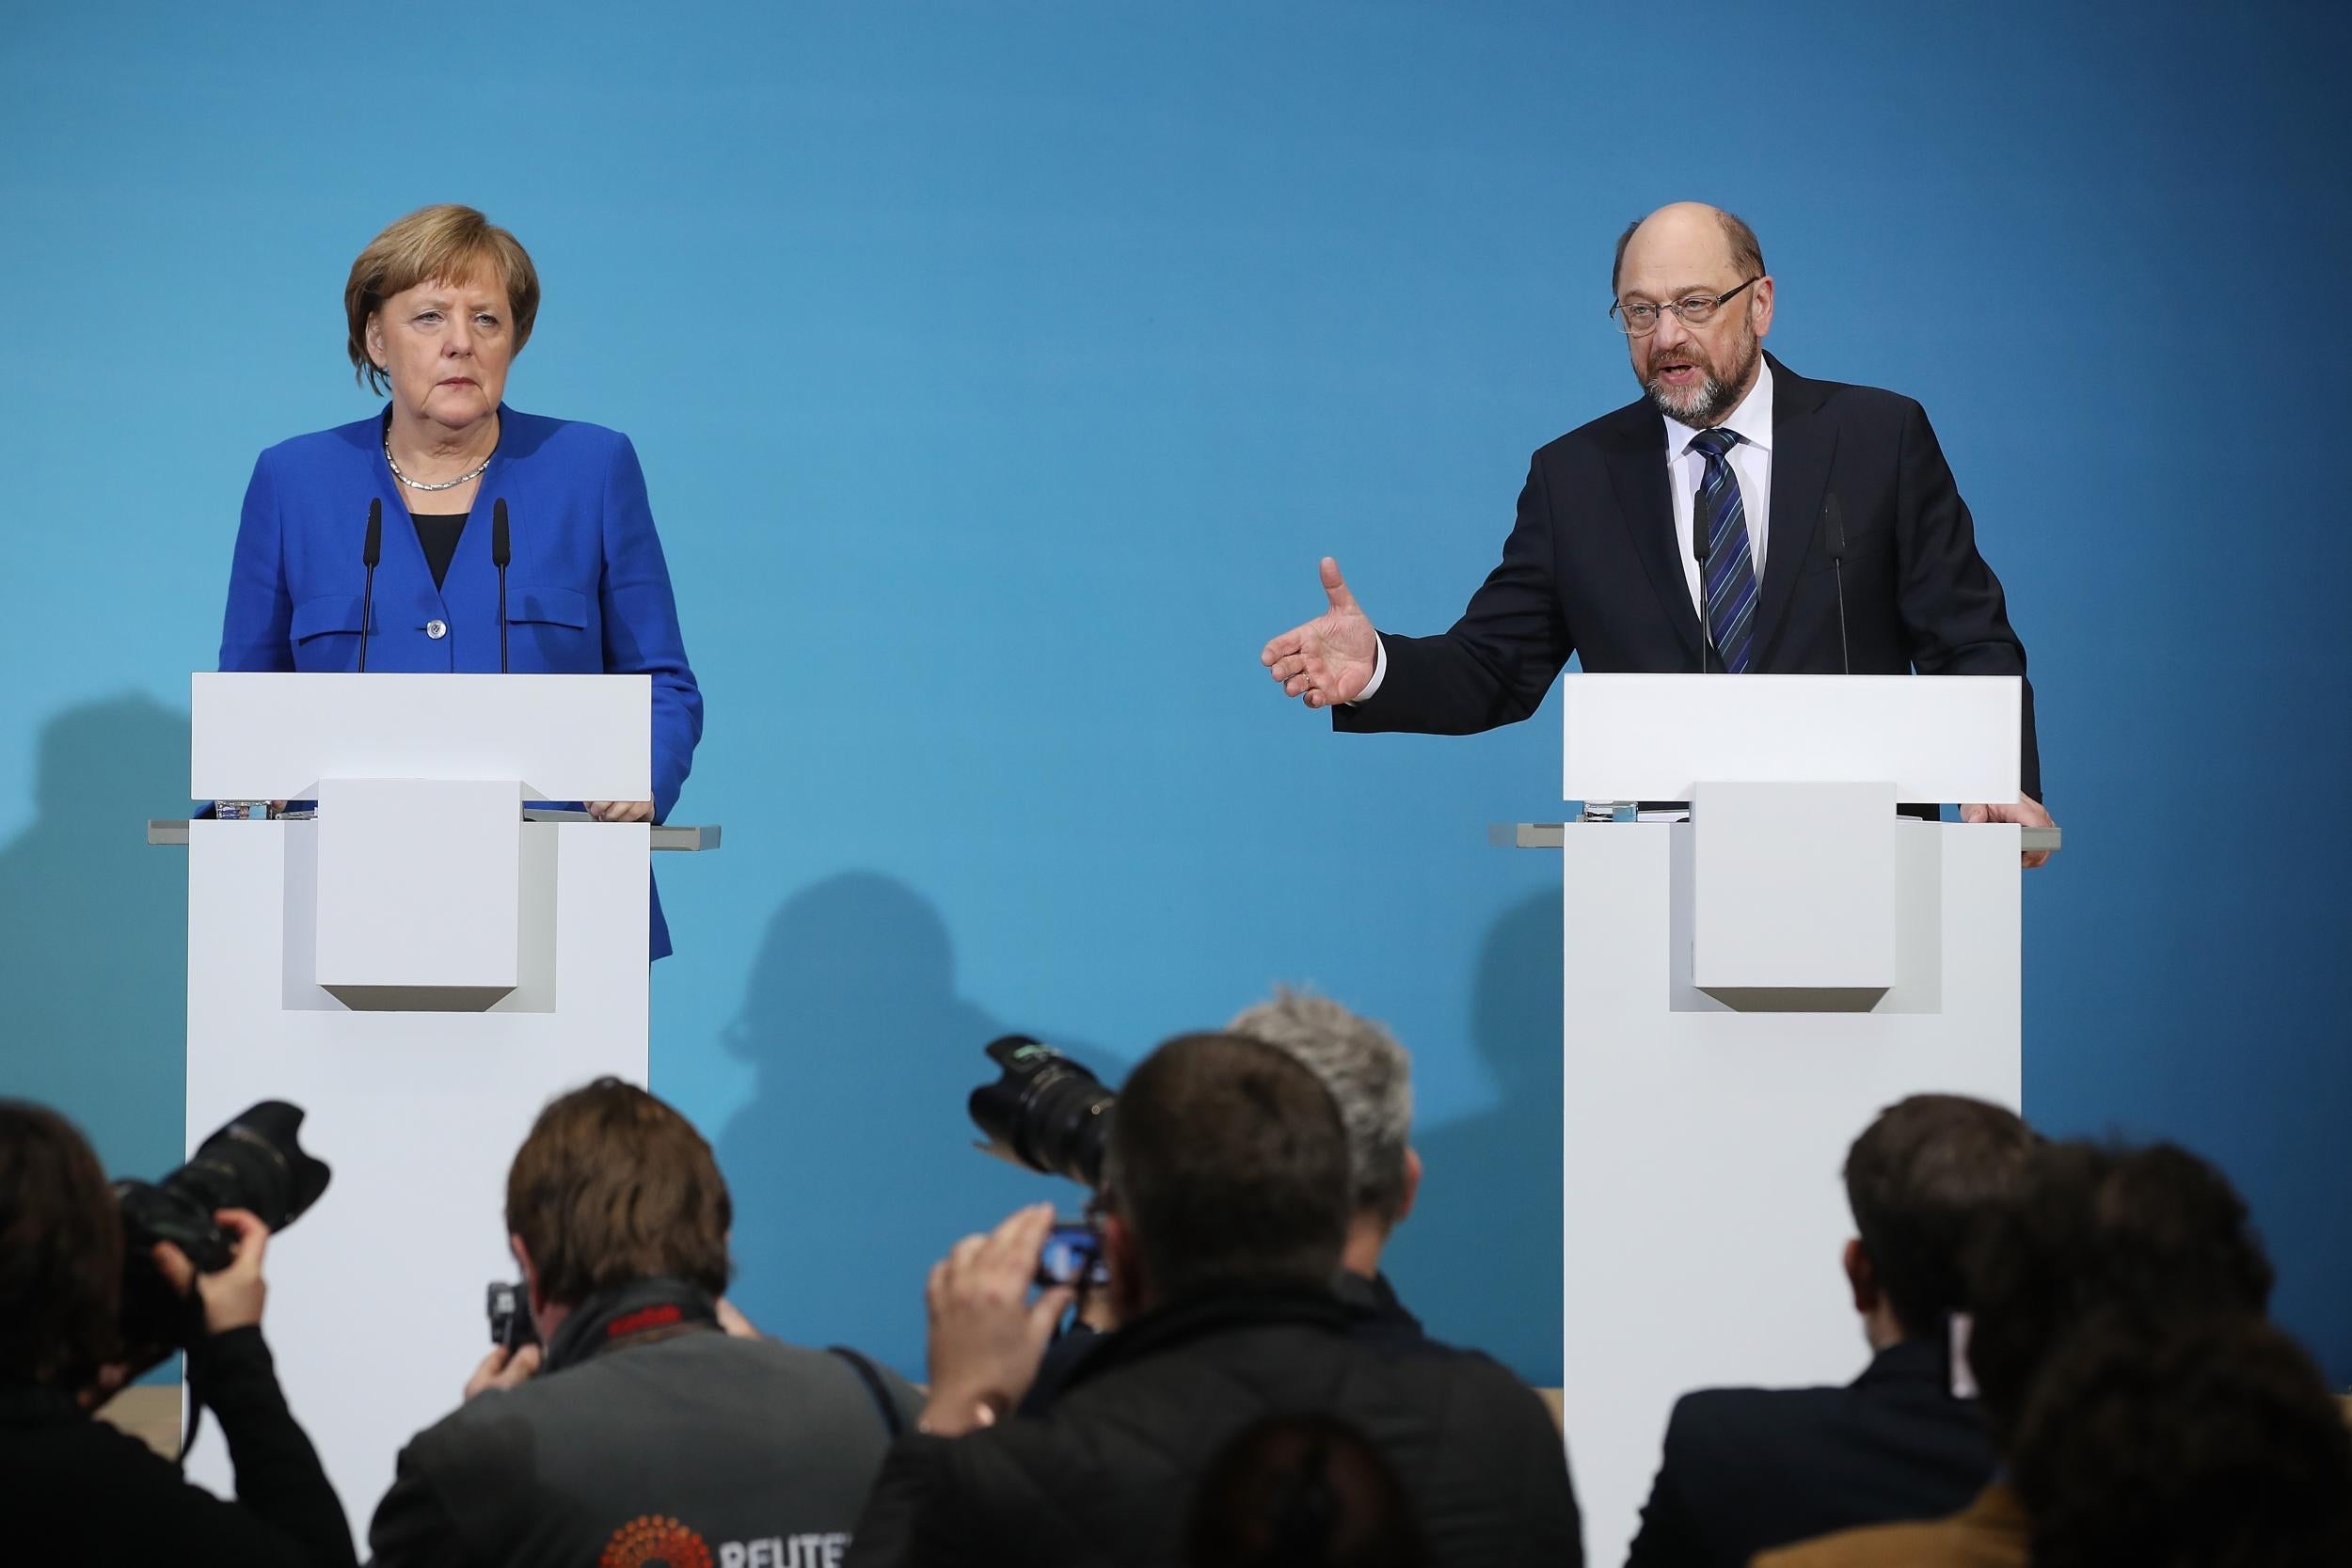 Chancellor Merkel and SPD leader Martin Schulz signalled that preliminary talks were a success, and that they will likely soon begin negotiations